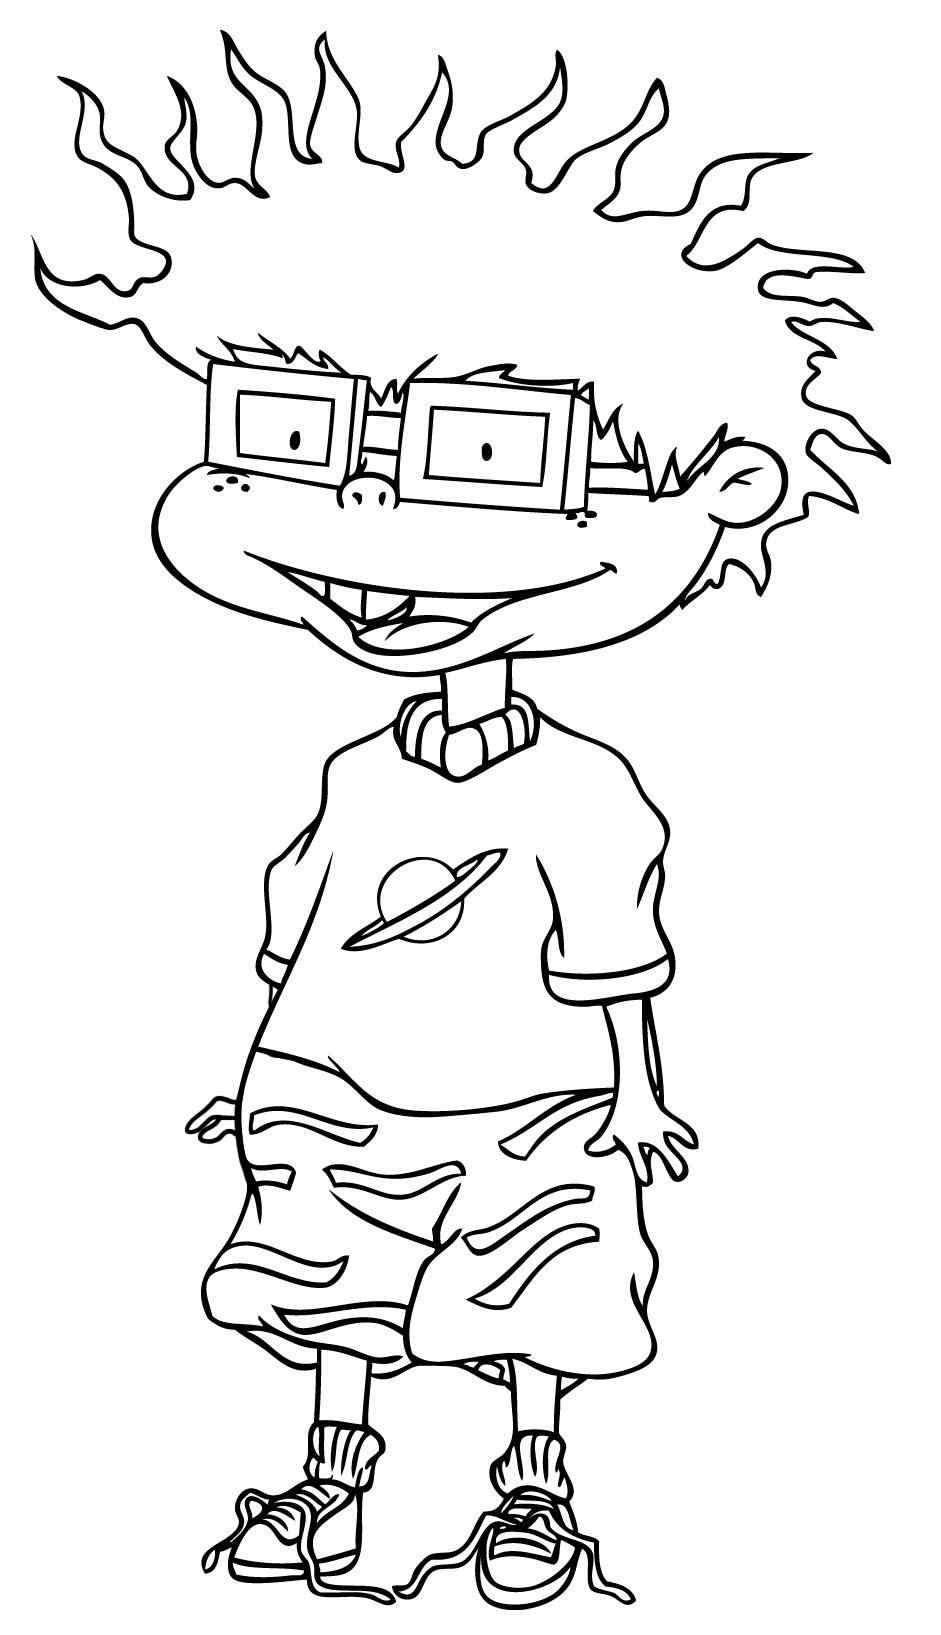 Rugrats With Glasses